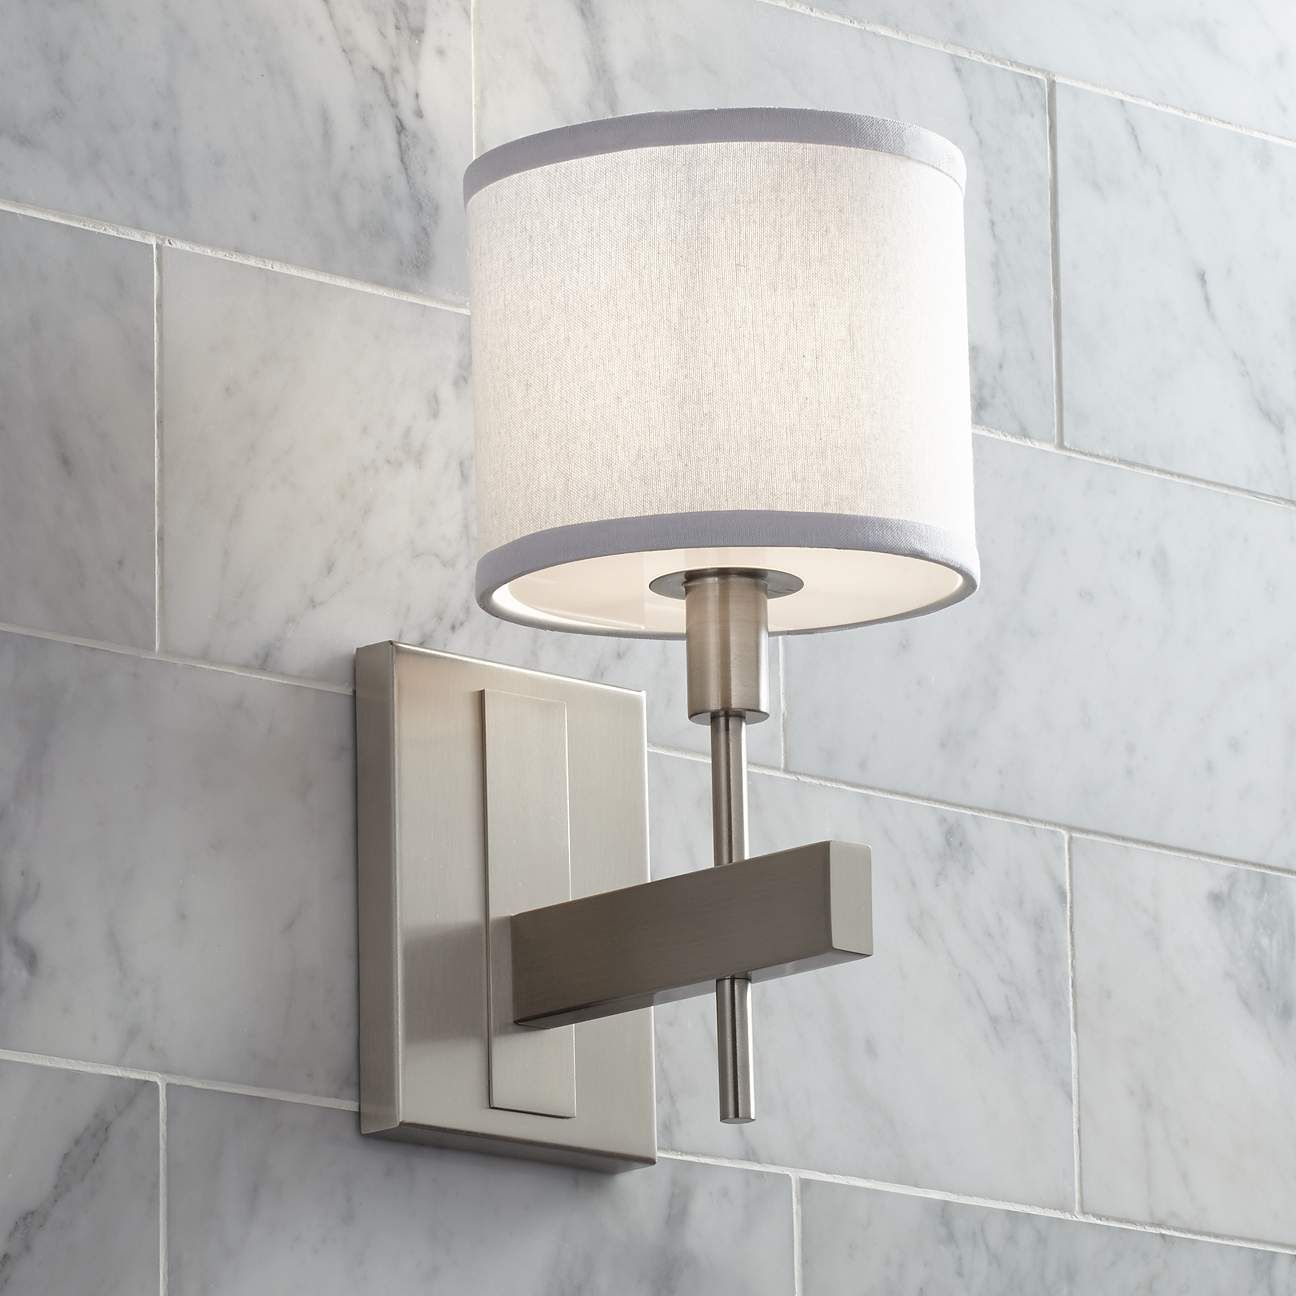 Orson 13 1/2" High Satin Nickel Wall Sconce | Lamps Plus